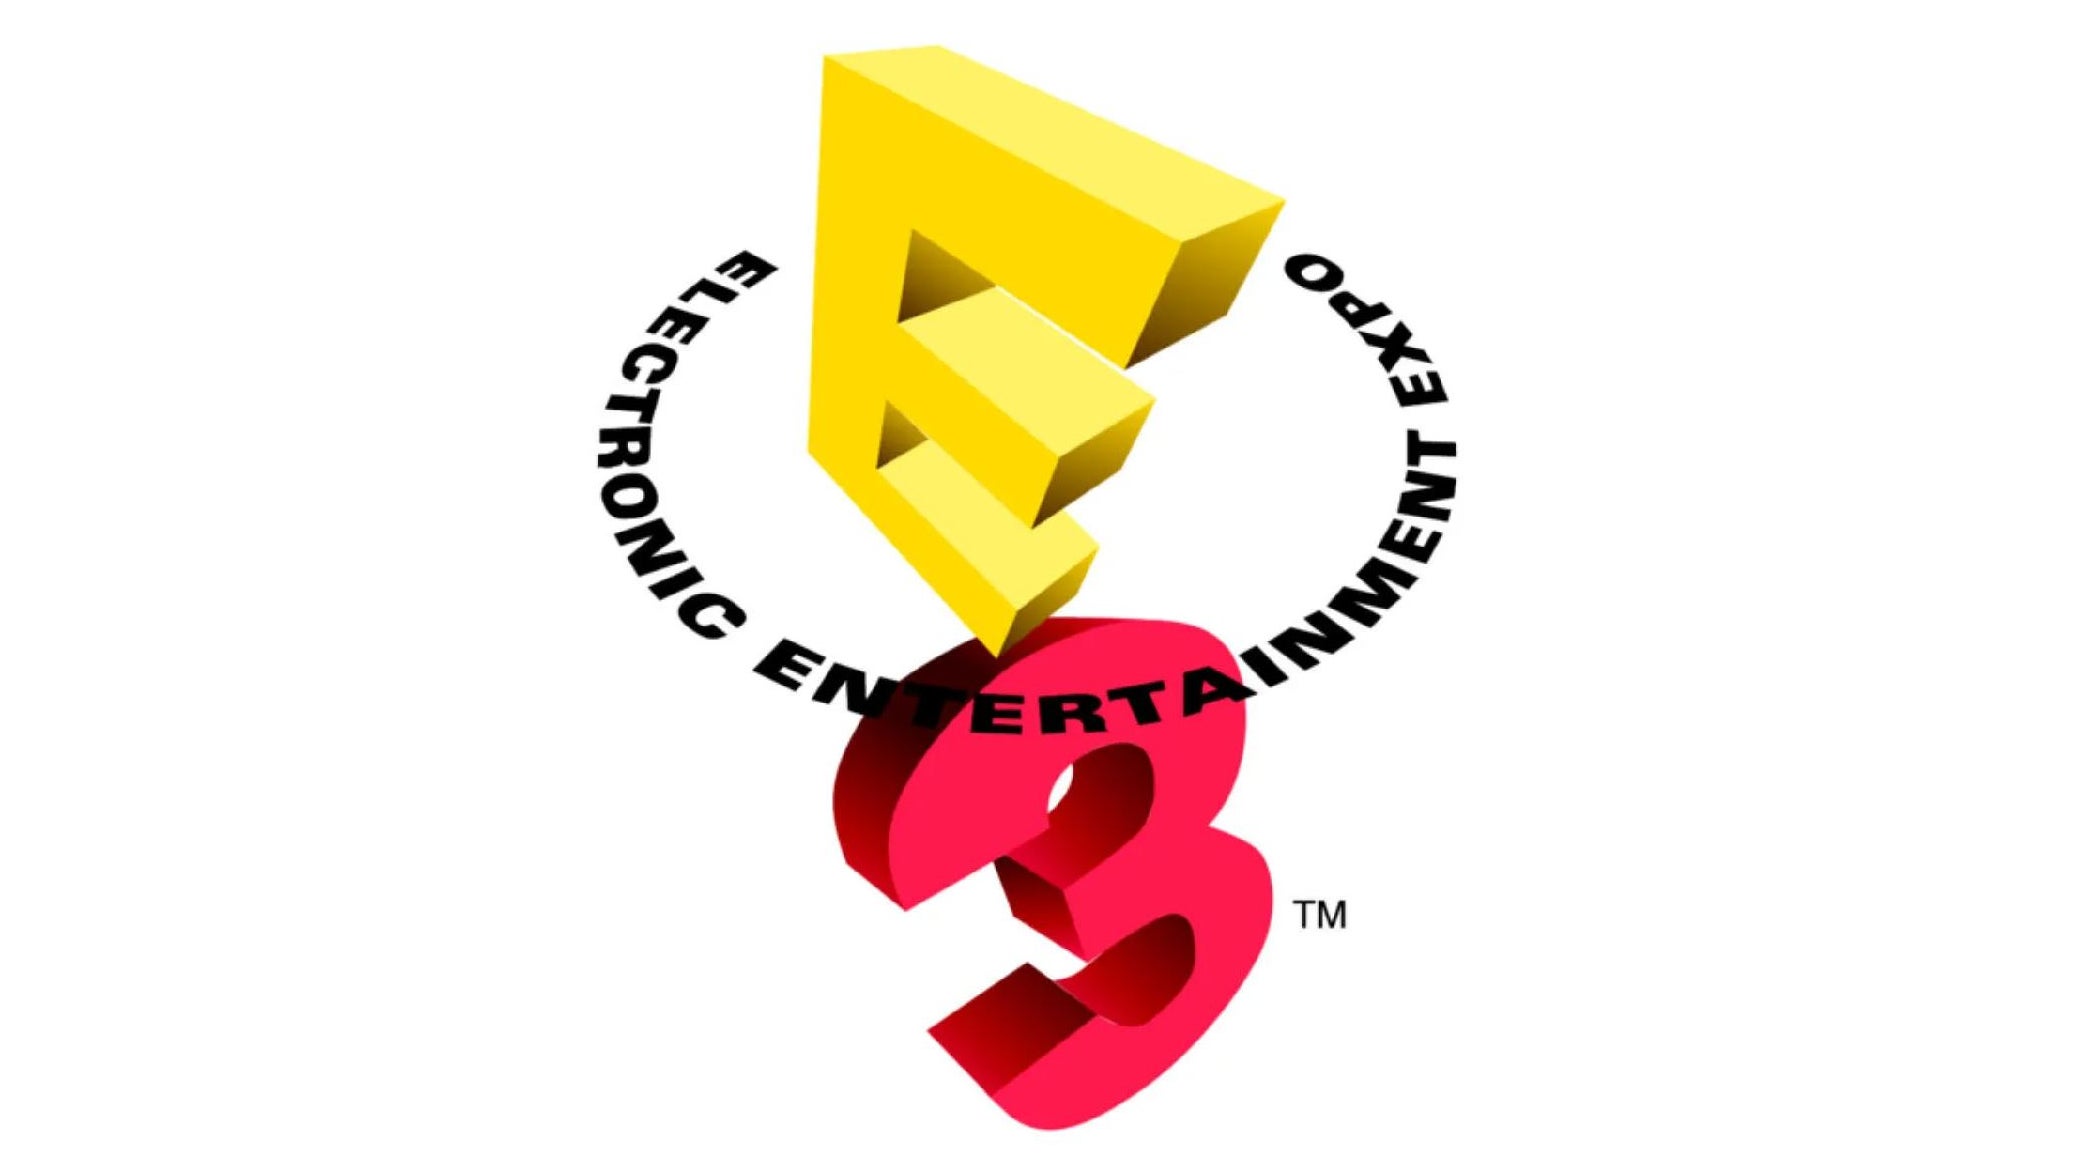 E3 is back in 2023, apparently